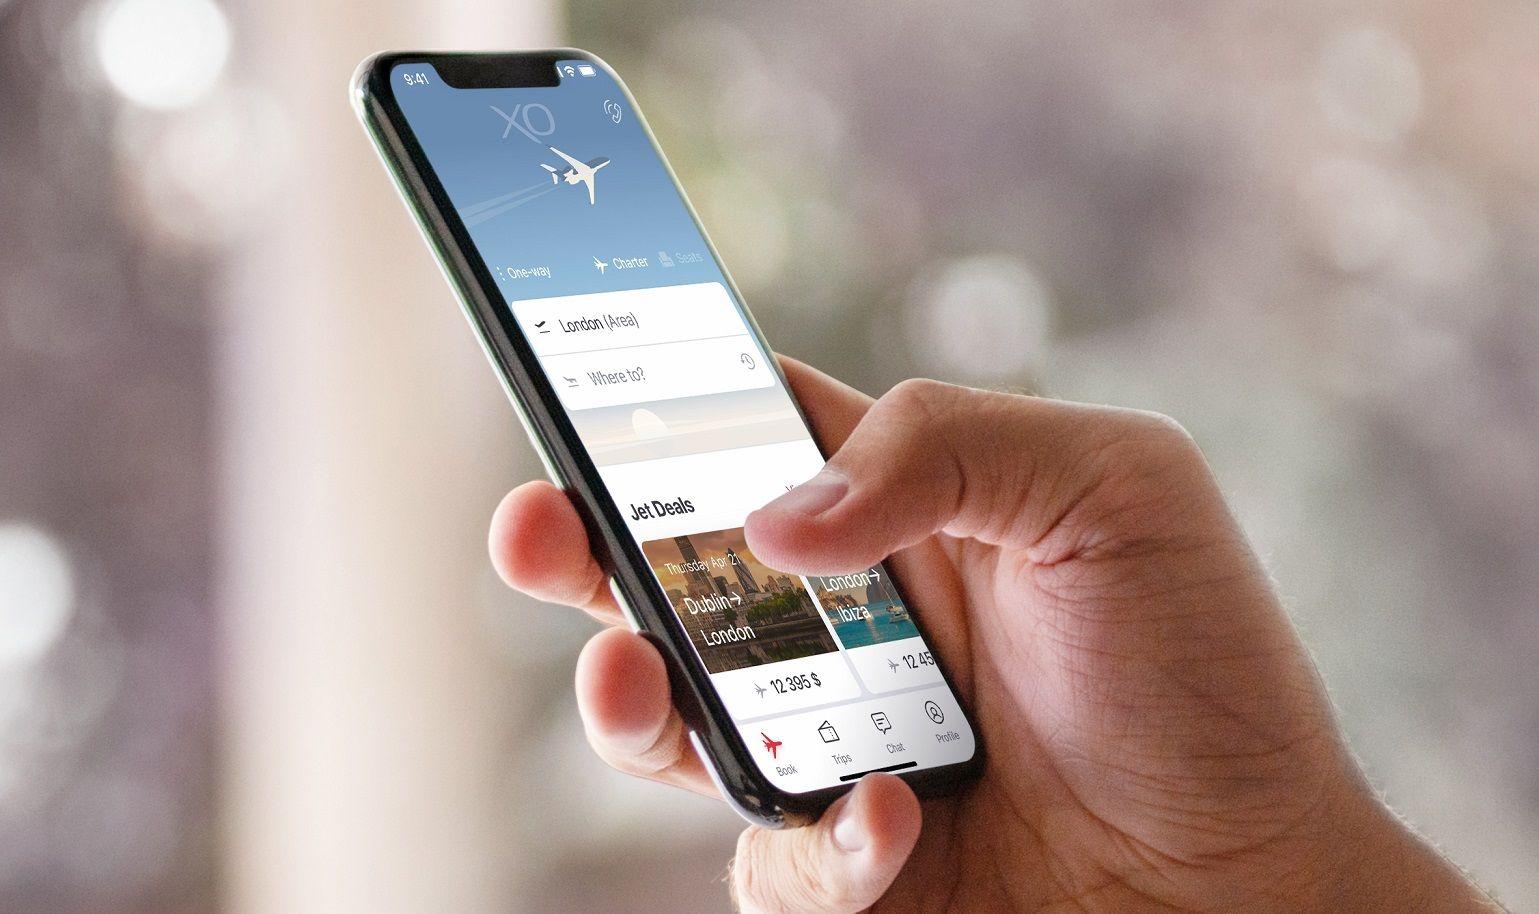 <p>XO utilizes data science to predict supply and demand and offer a private jet experience at 1/10th of the price and a more sustainable approach to flying private. All flights can be searched online or in our XO mobile app and booked directly.</p>